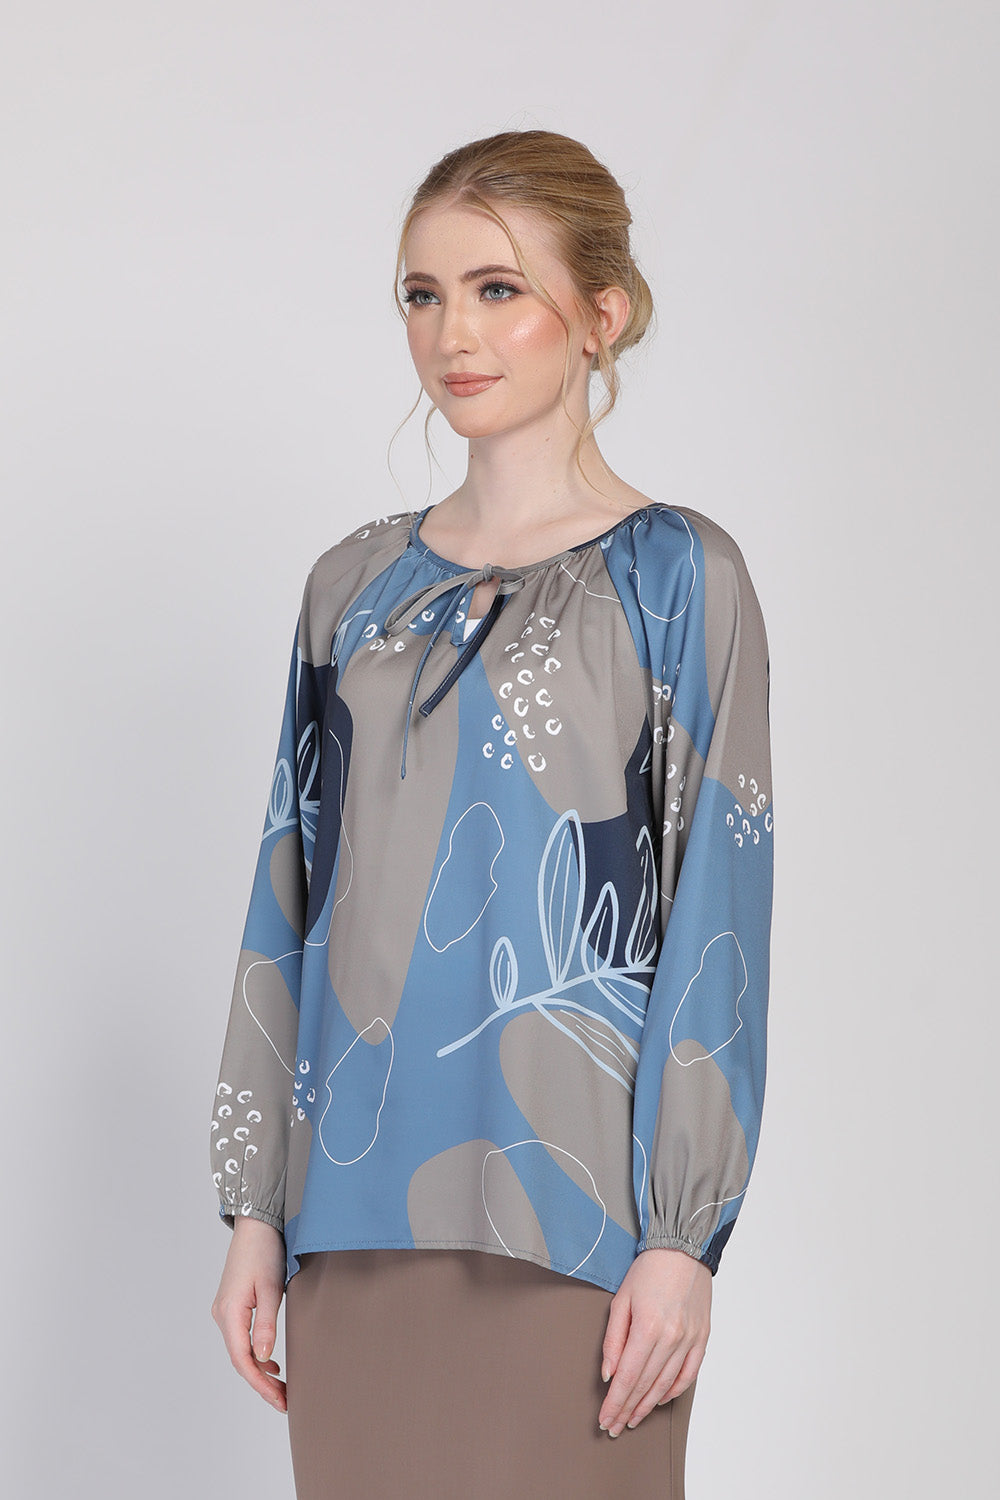 The Ceria 2.0 Blouse in Dusty Blue